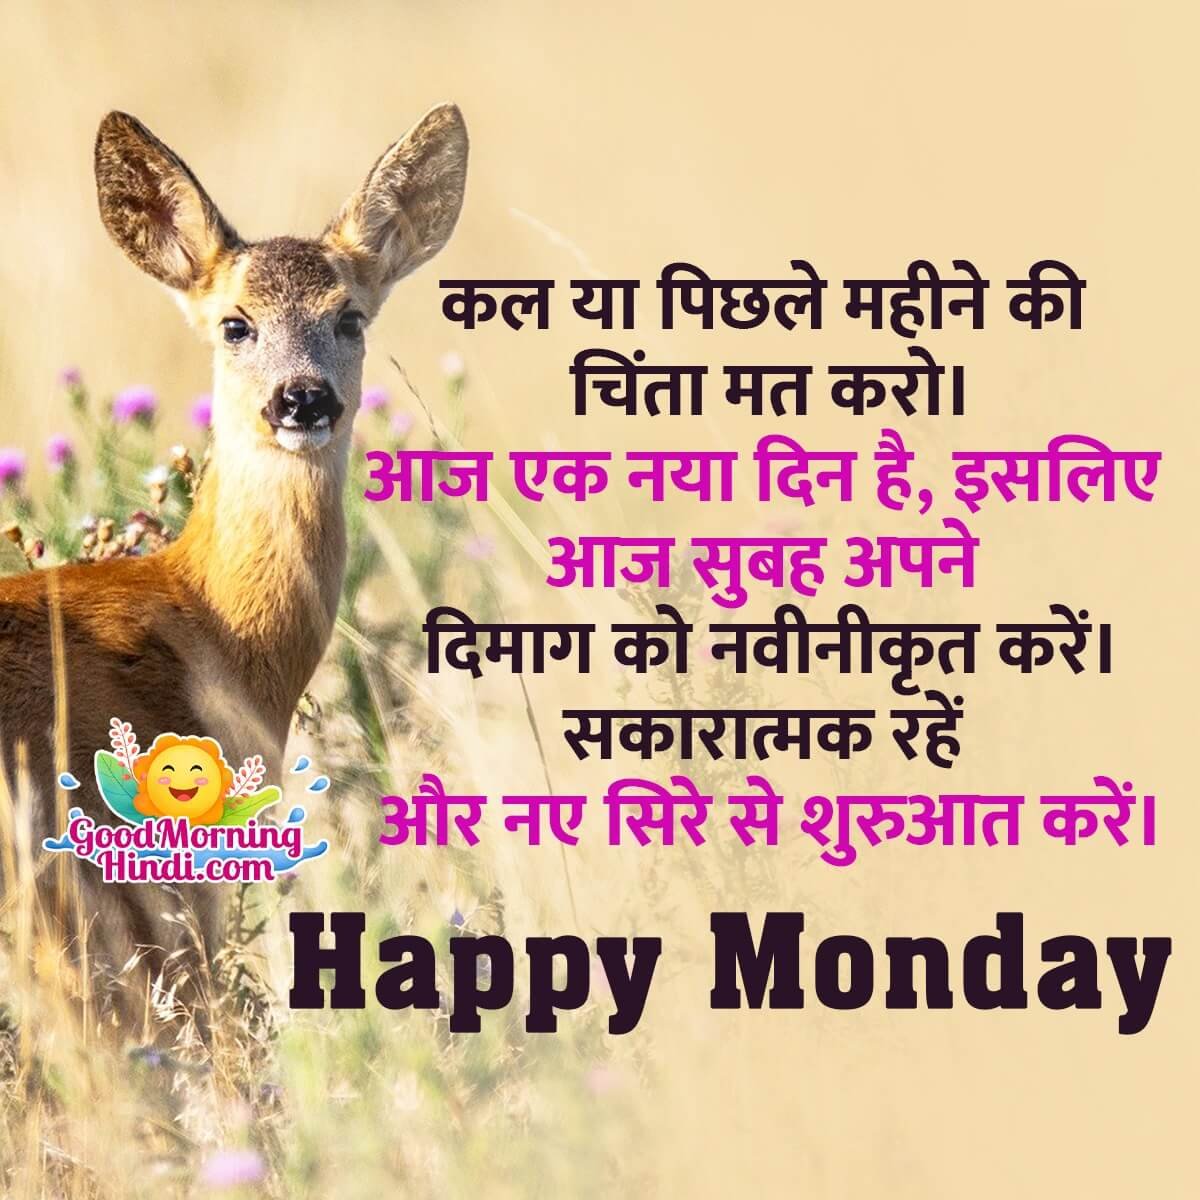 Happy Monday Messages In Hindi - Good Morning Wishes & Images In Hindi